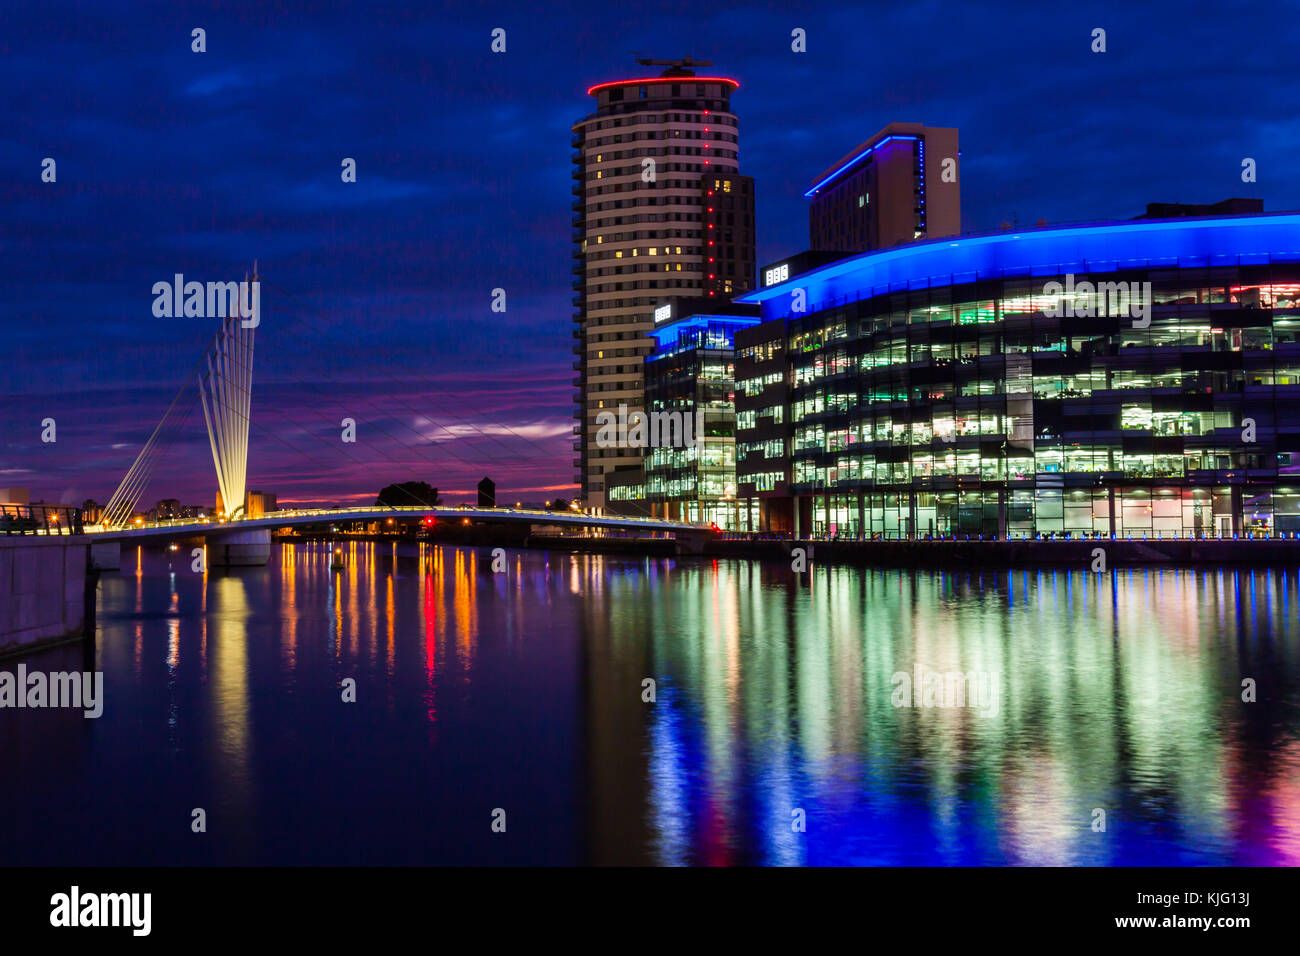 Evening Images of Media City Salford on the Manchester Ship Canal. Salford Quays. Stock Photo